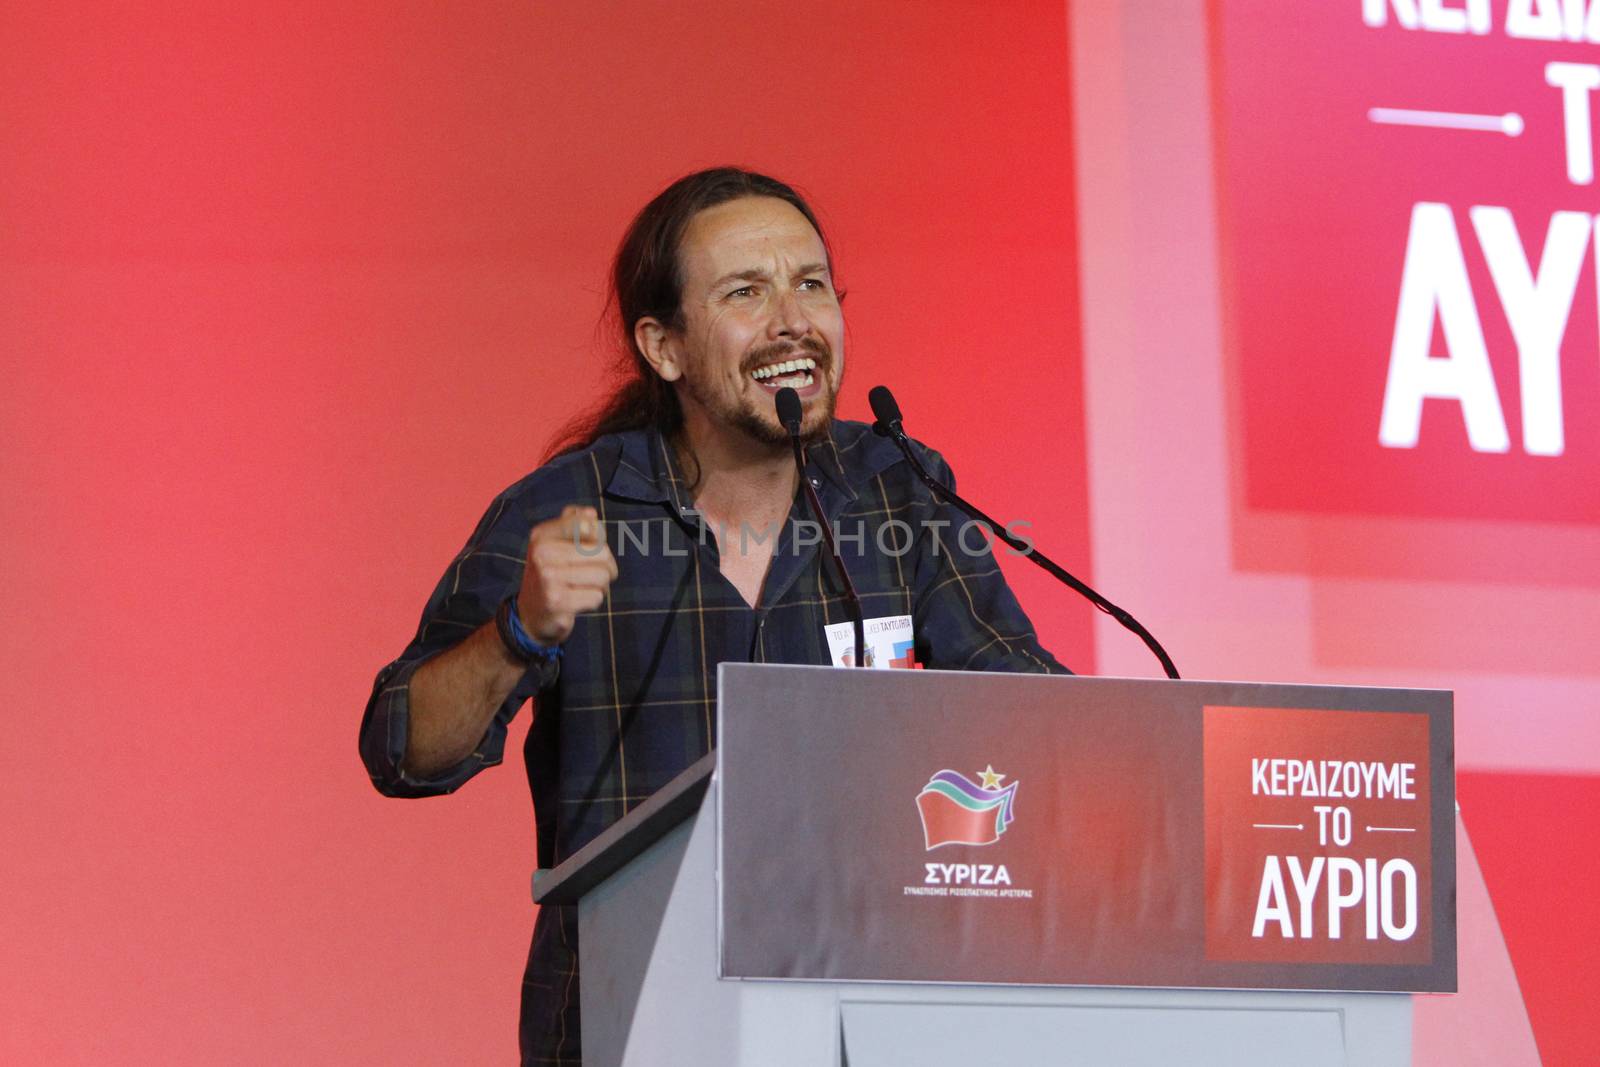 GREECE, Athens: Pablo Iglesias, the leader of the Spanish anti-austerity Podemos party, addresses Syriza supporters during the party's final election rally at Syntagma Square, Athens on September 18, 2015 two days ahead of the Greek General Election